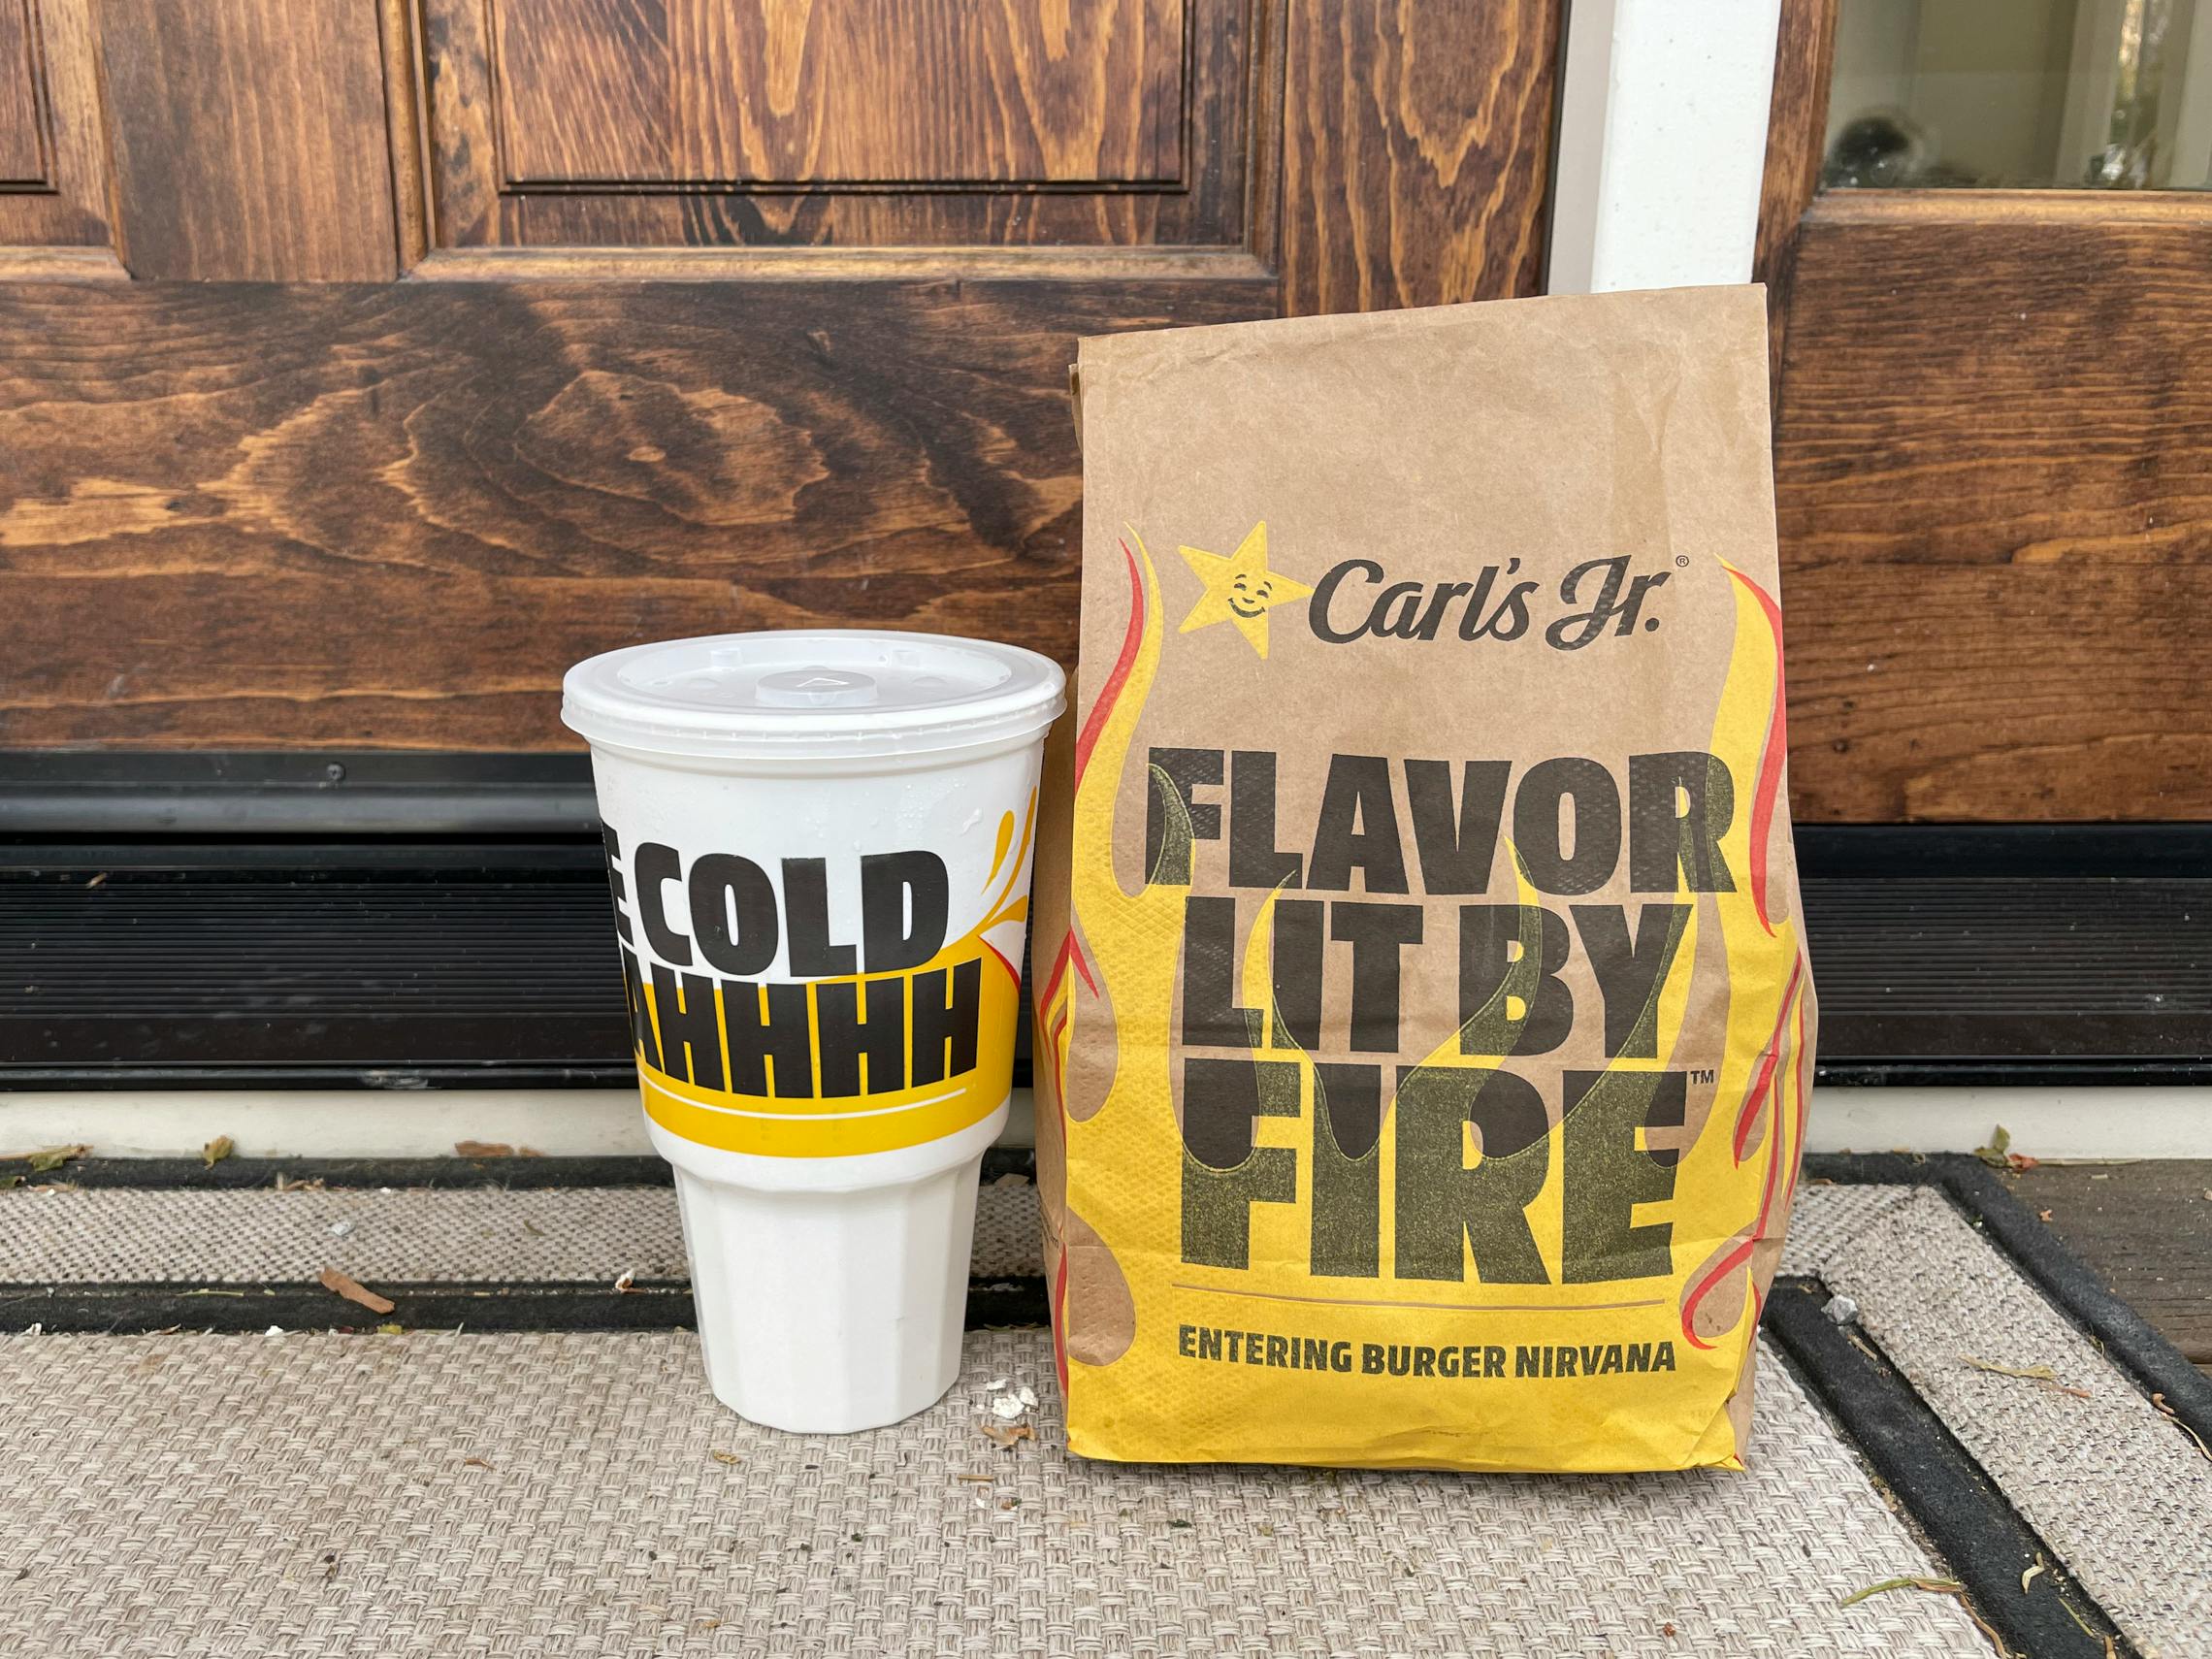 Carl's Jr take out bag and drink sitting on a front porch.